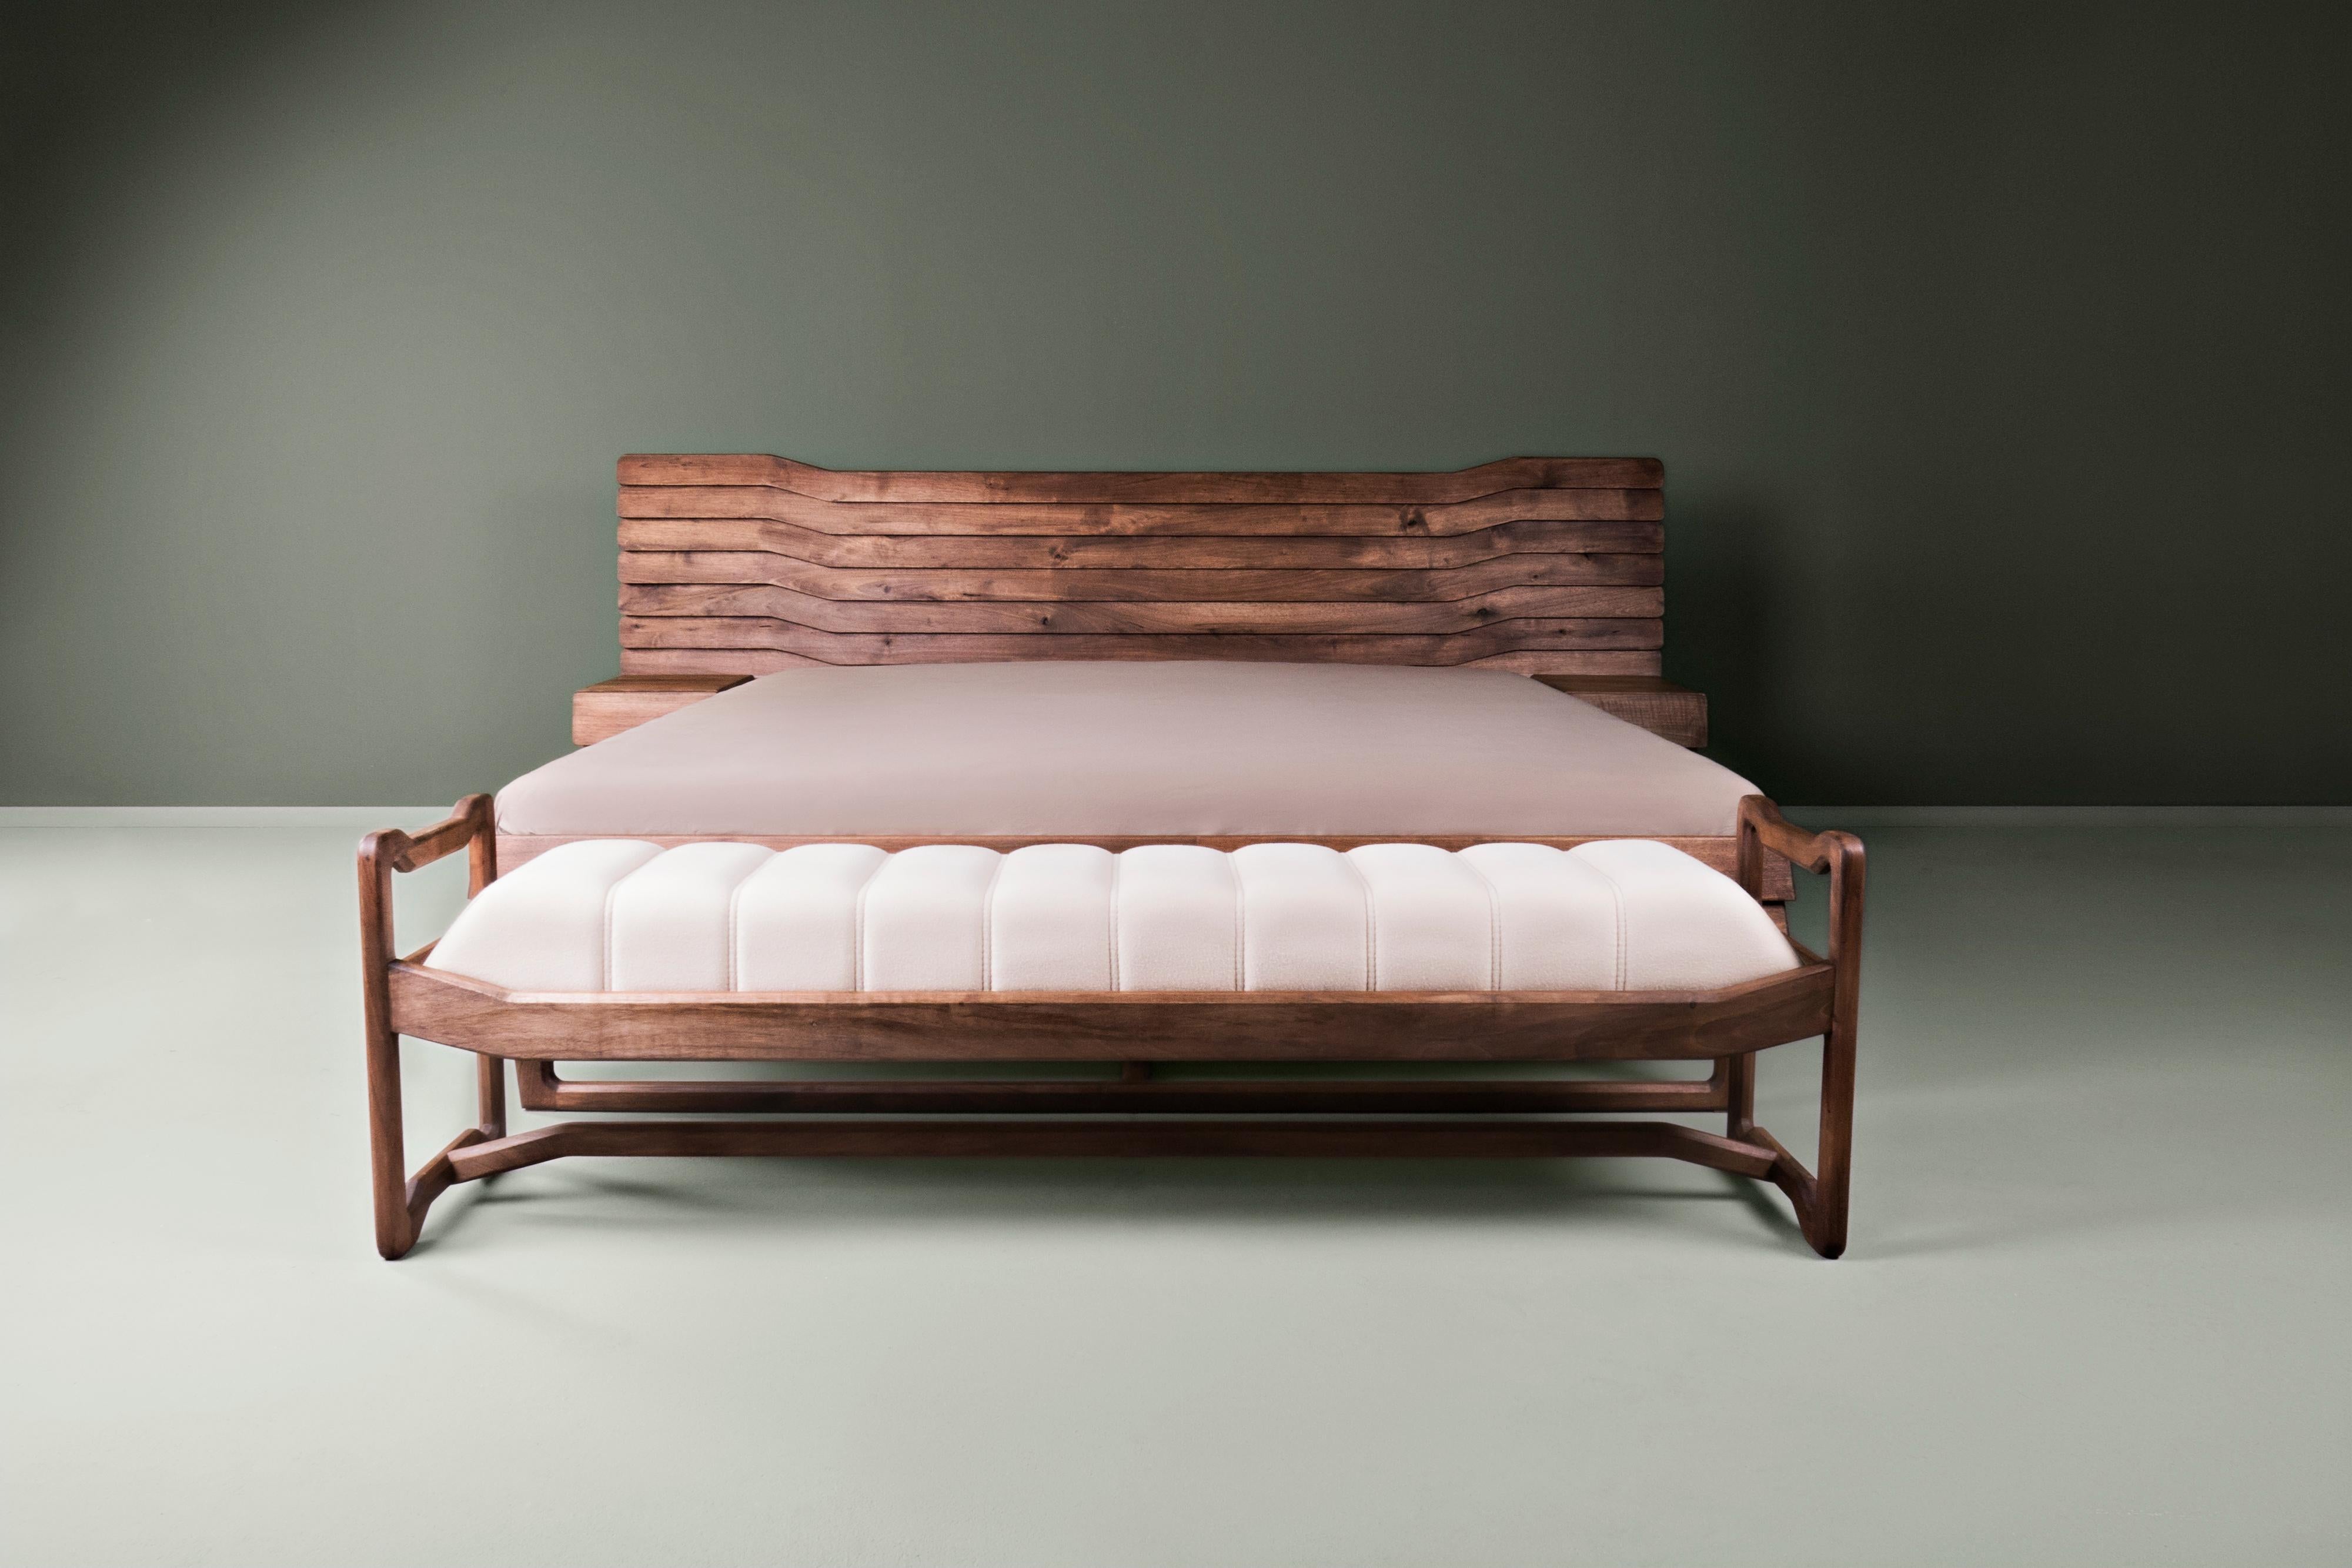 This bench was created as an addition to the bed Wave. The primary purpose was to be set up in front of or near the bed Wave and to be a support element for changing clothes. In addition, it can be combined as a bench with dining tables in